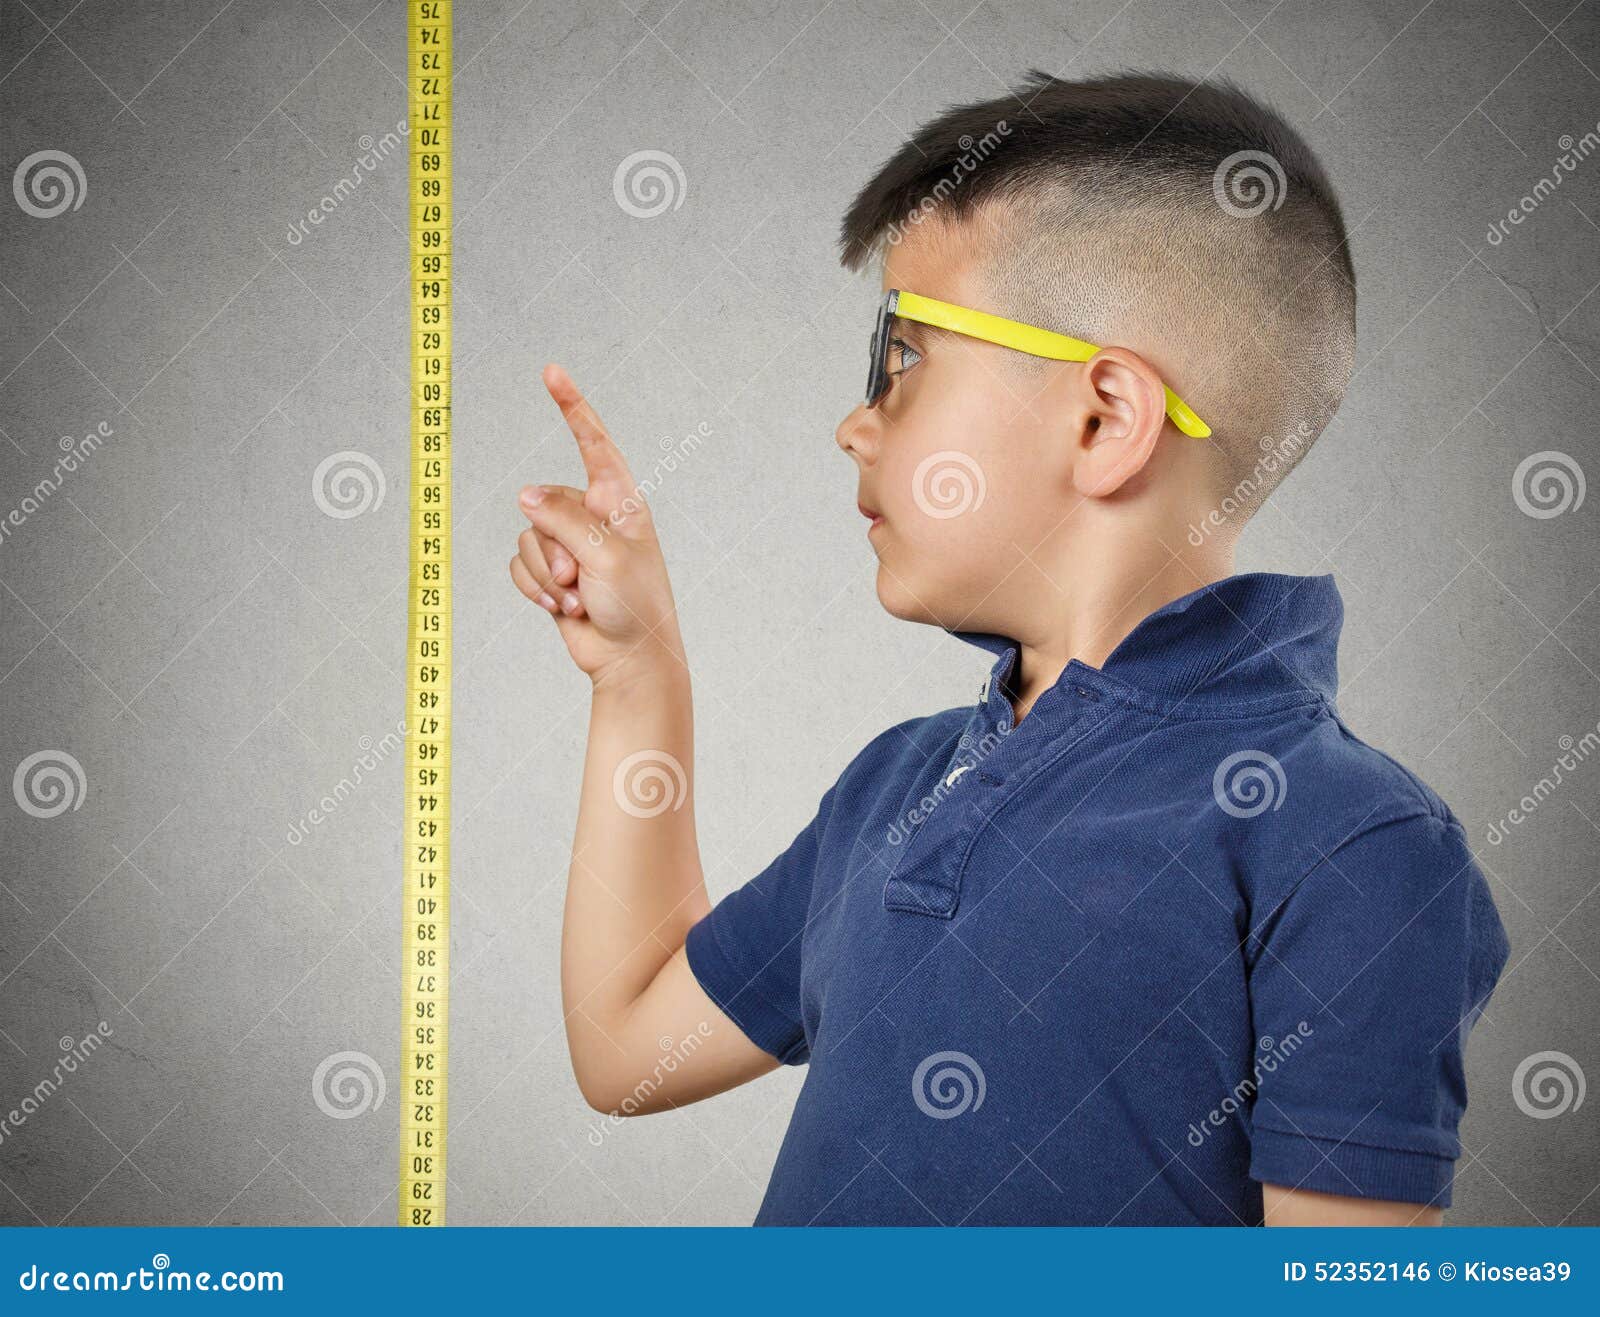 child pointing at his height on measuring tape